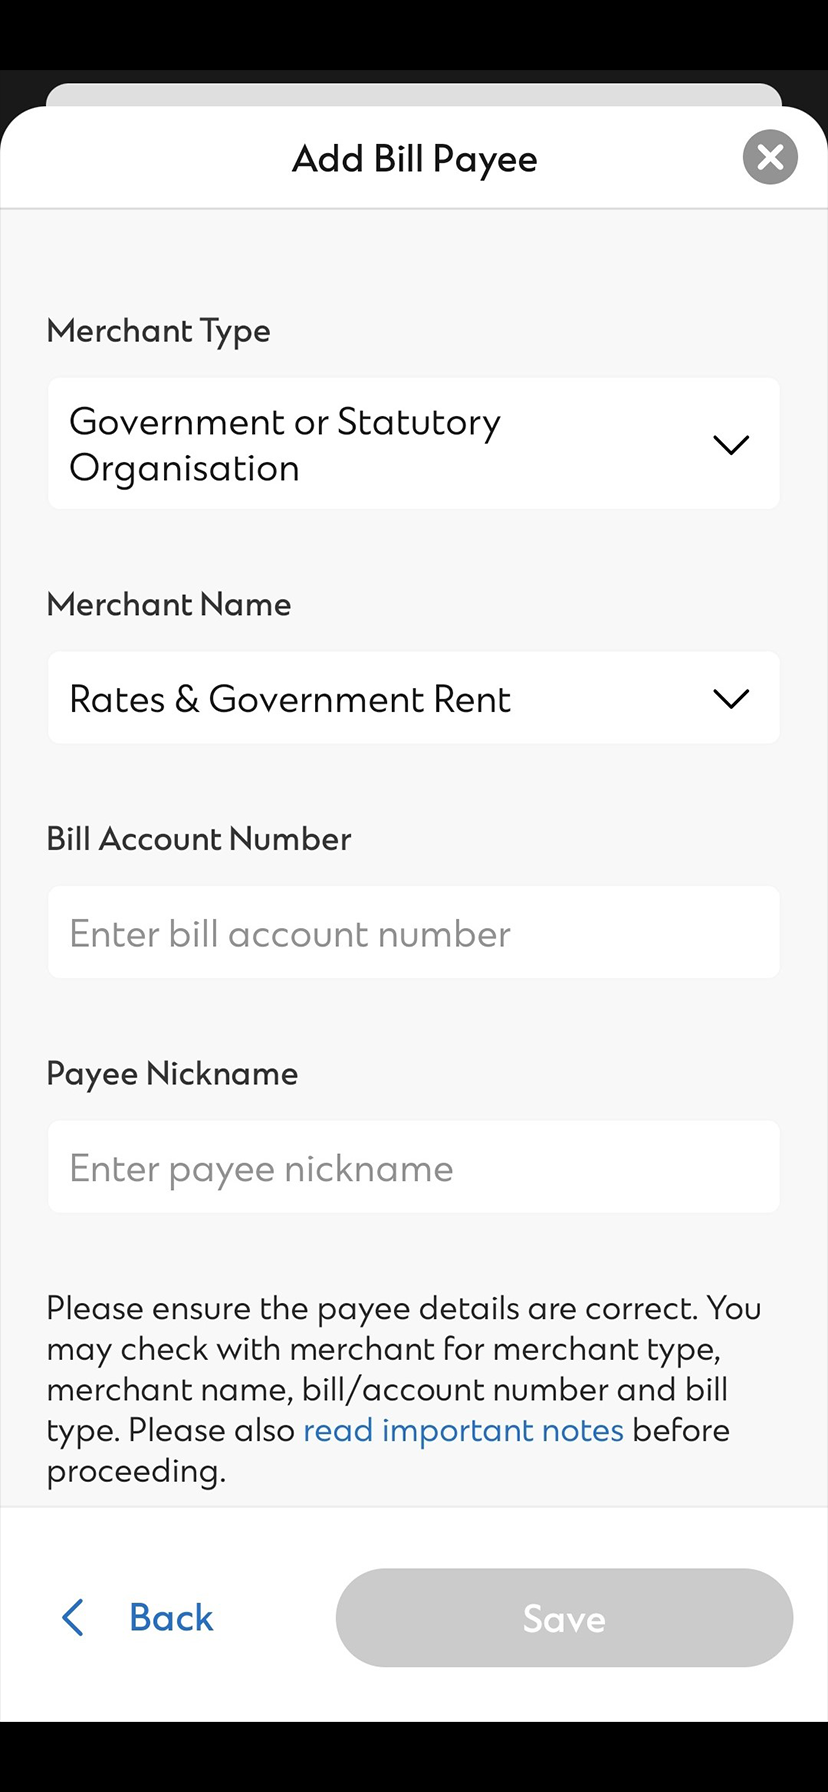 How to add bill payee via SC Mobile Step 3